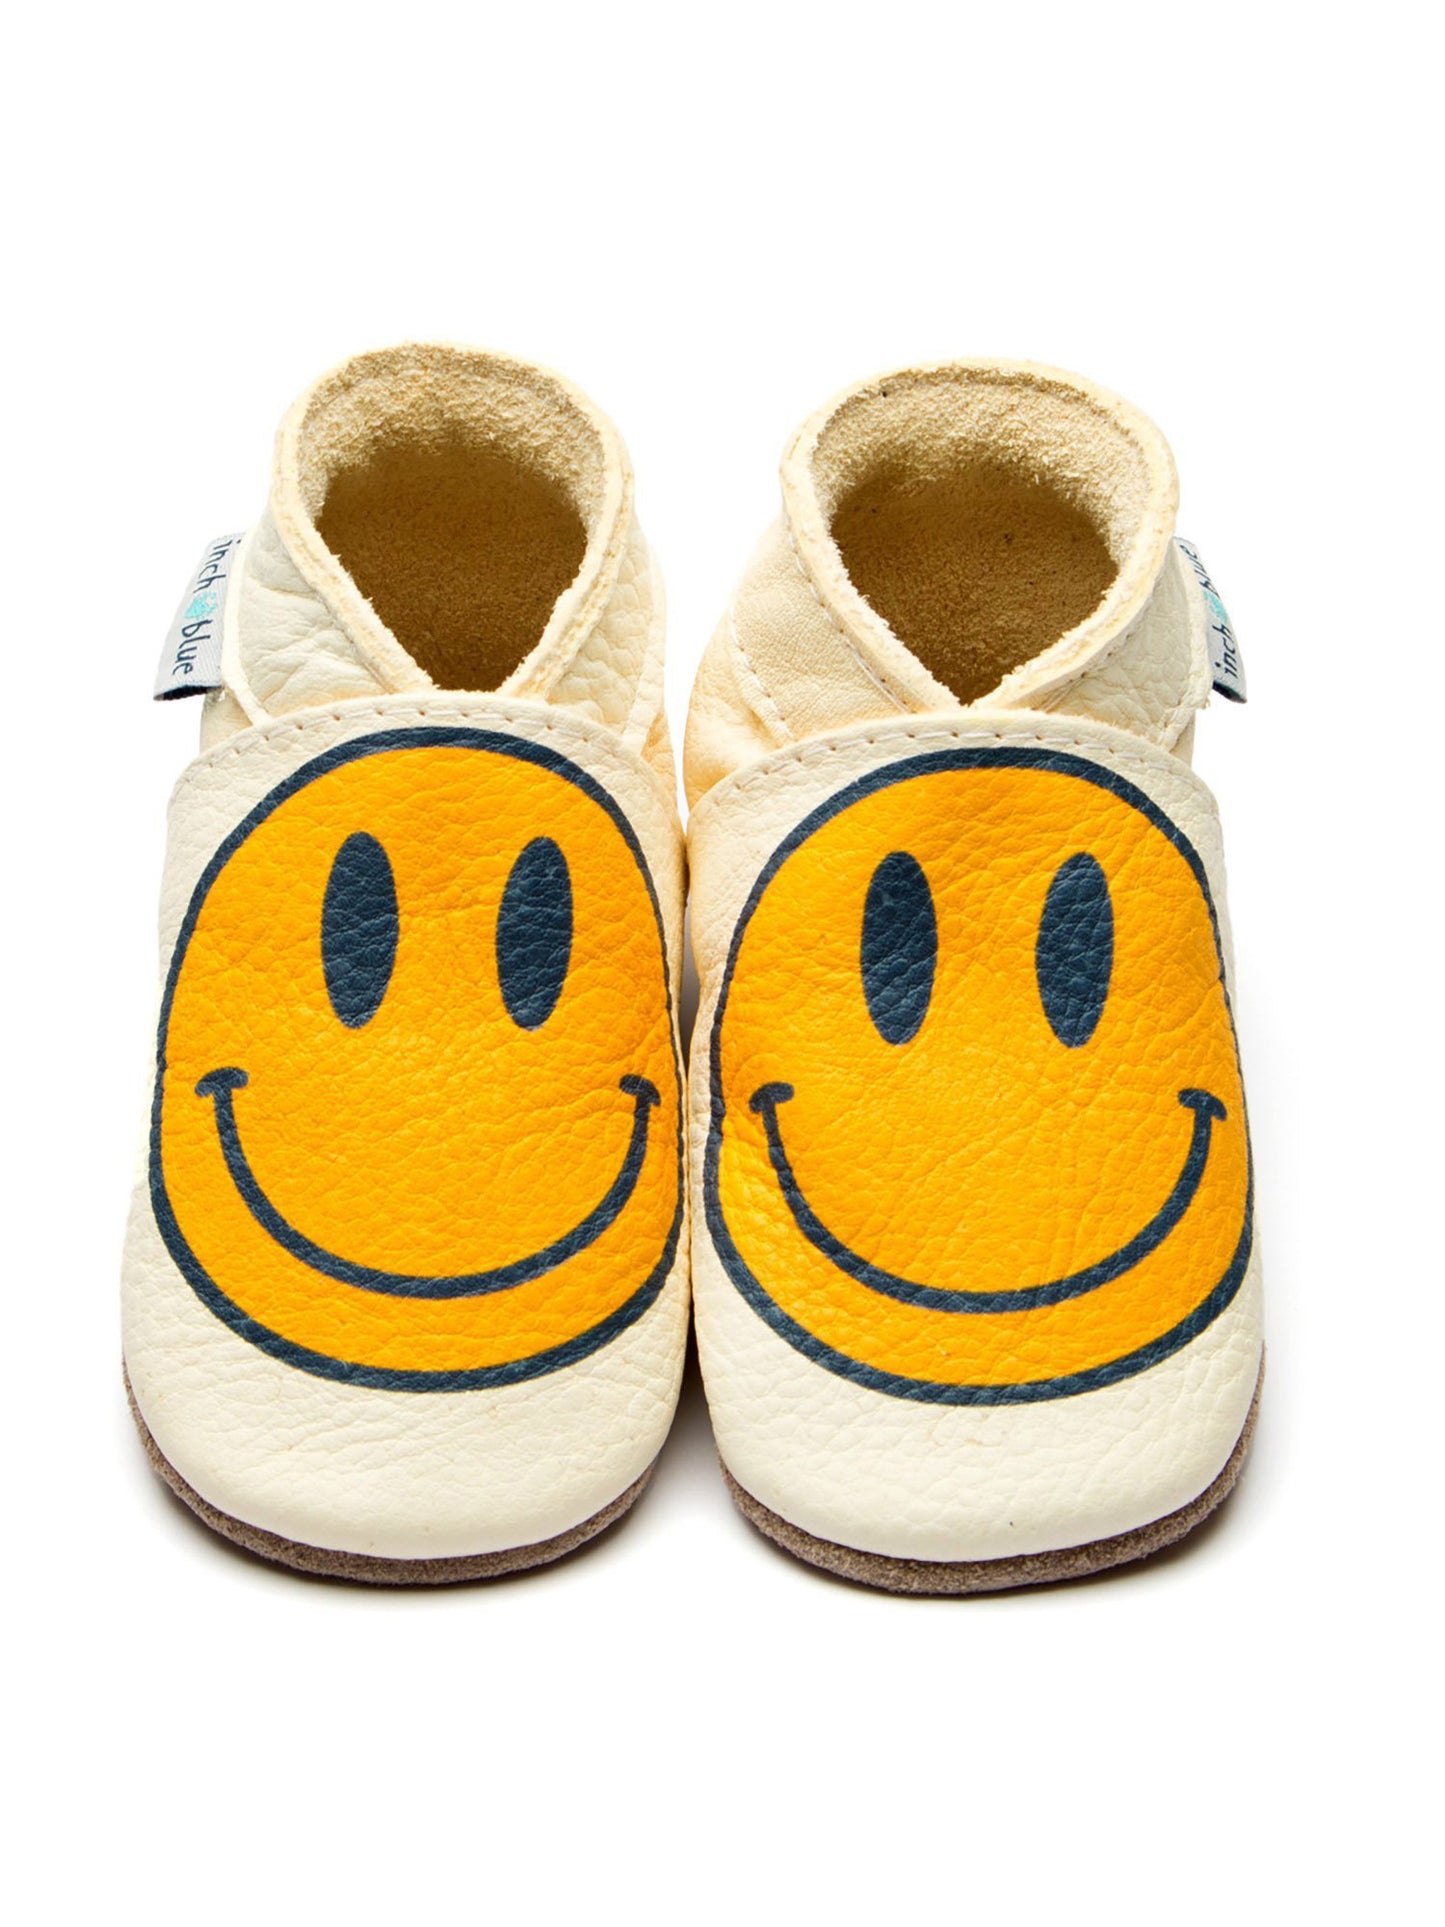 Smiley Baby Shoes